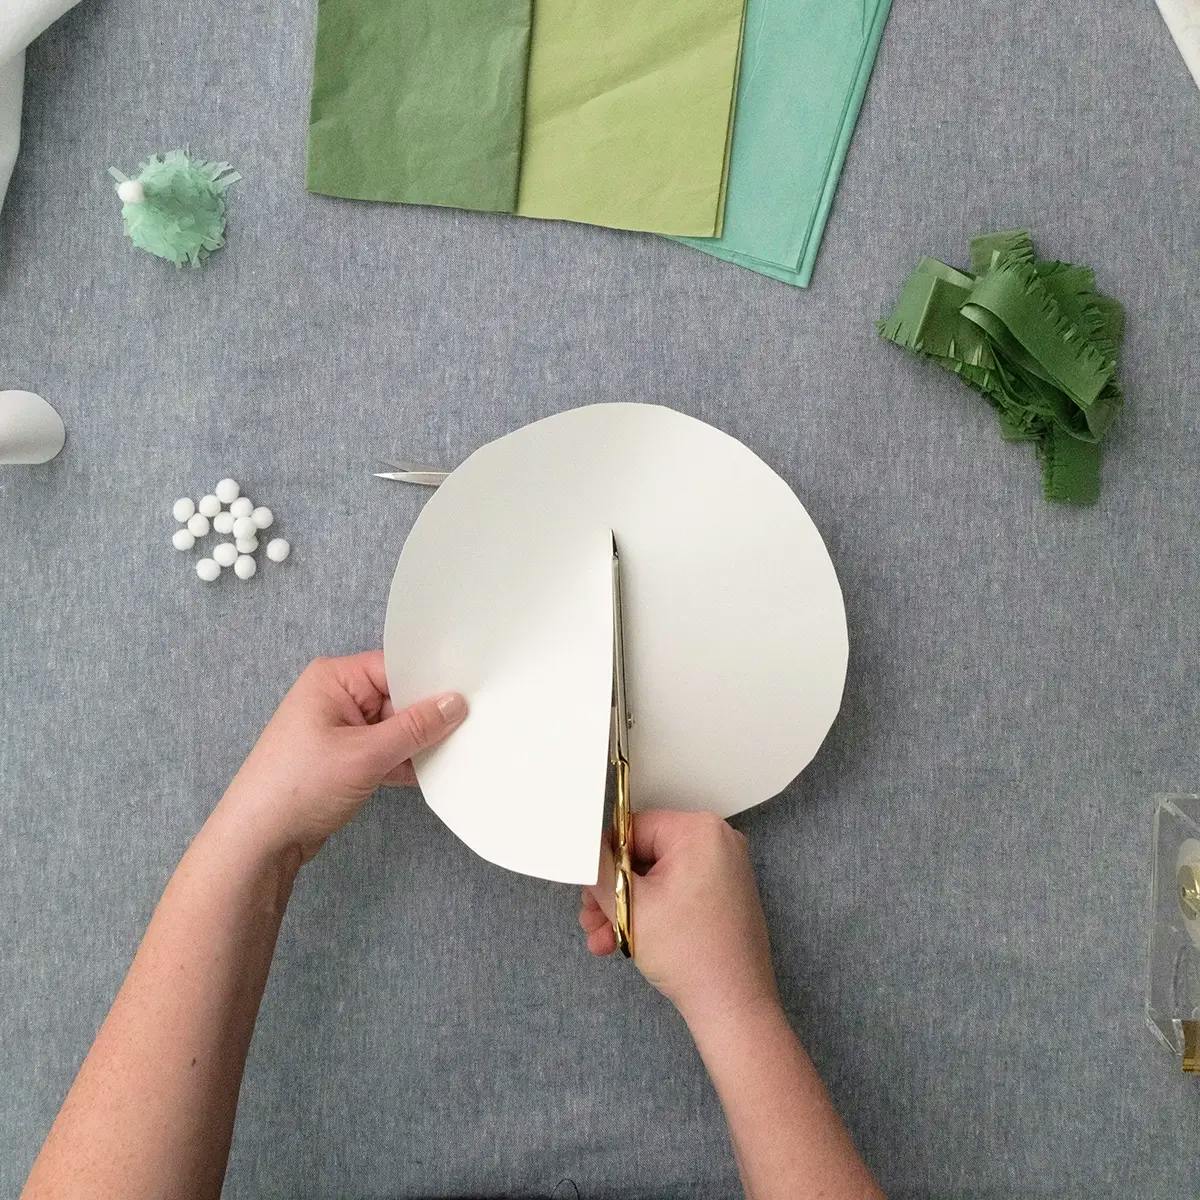 Cutting paper circles in half to create paper tree ornaments.